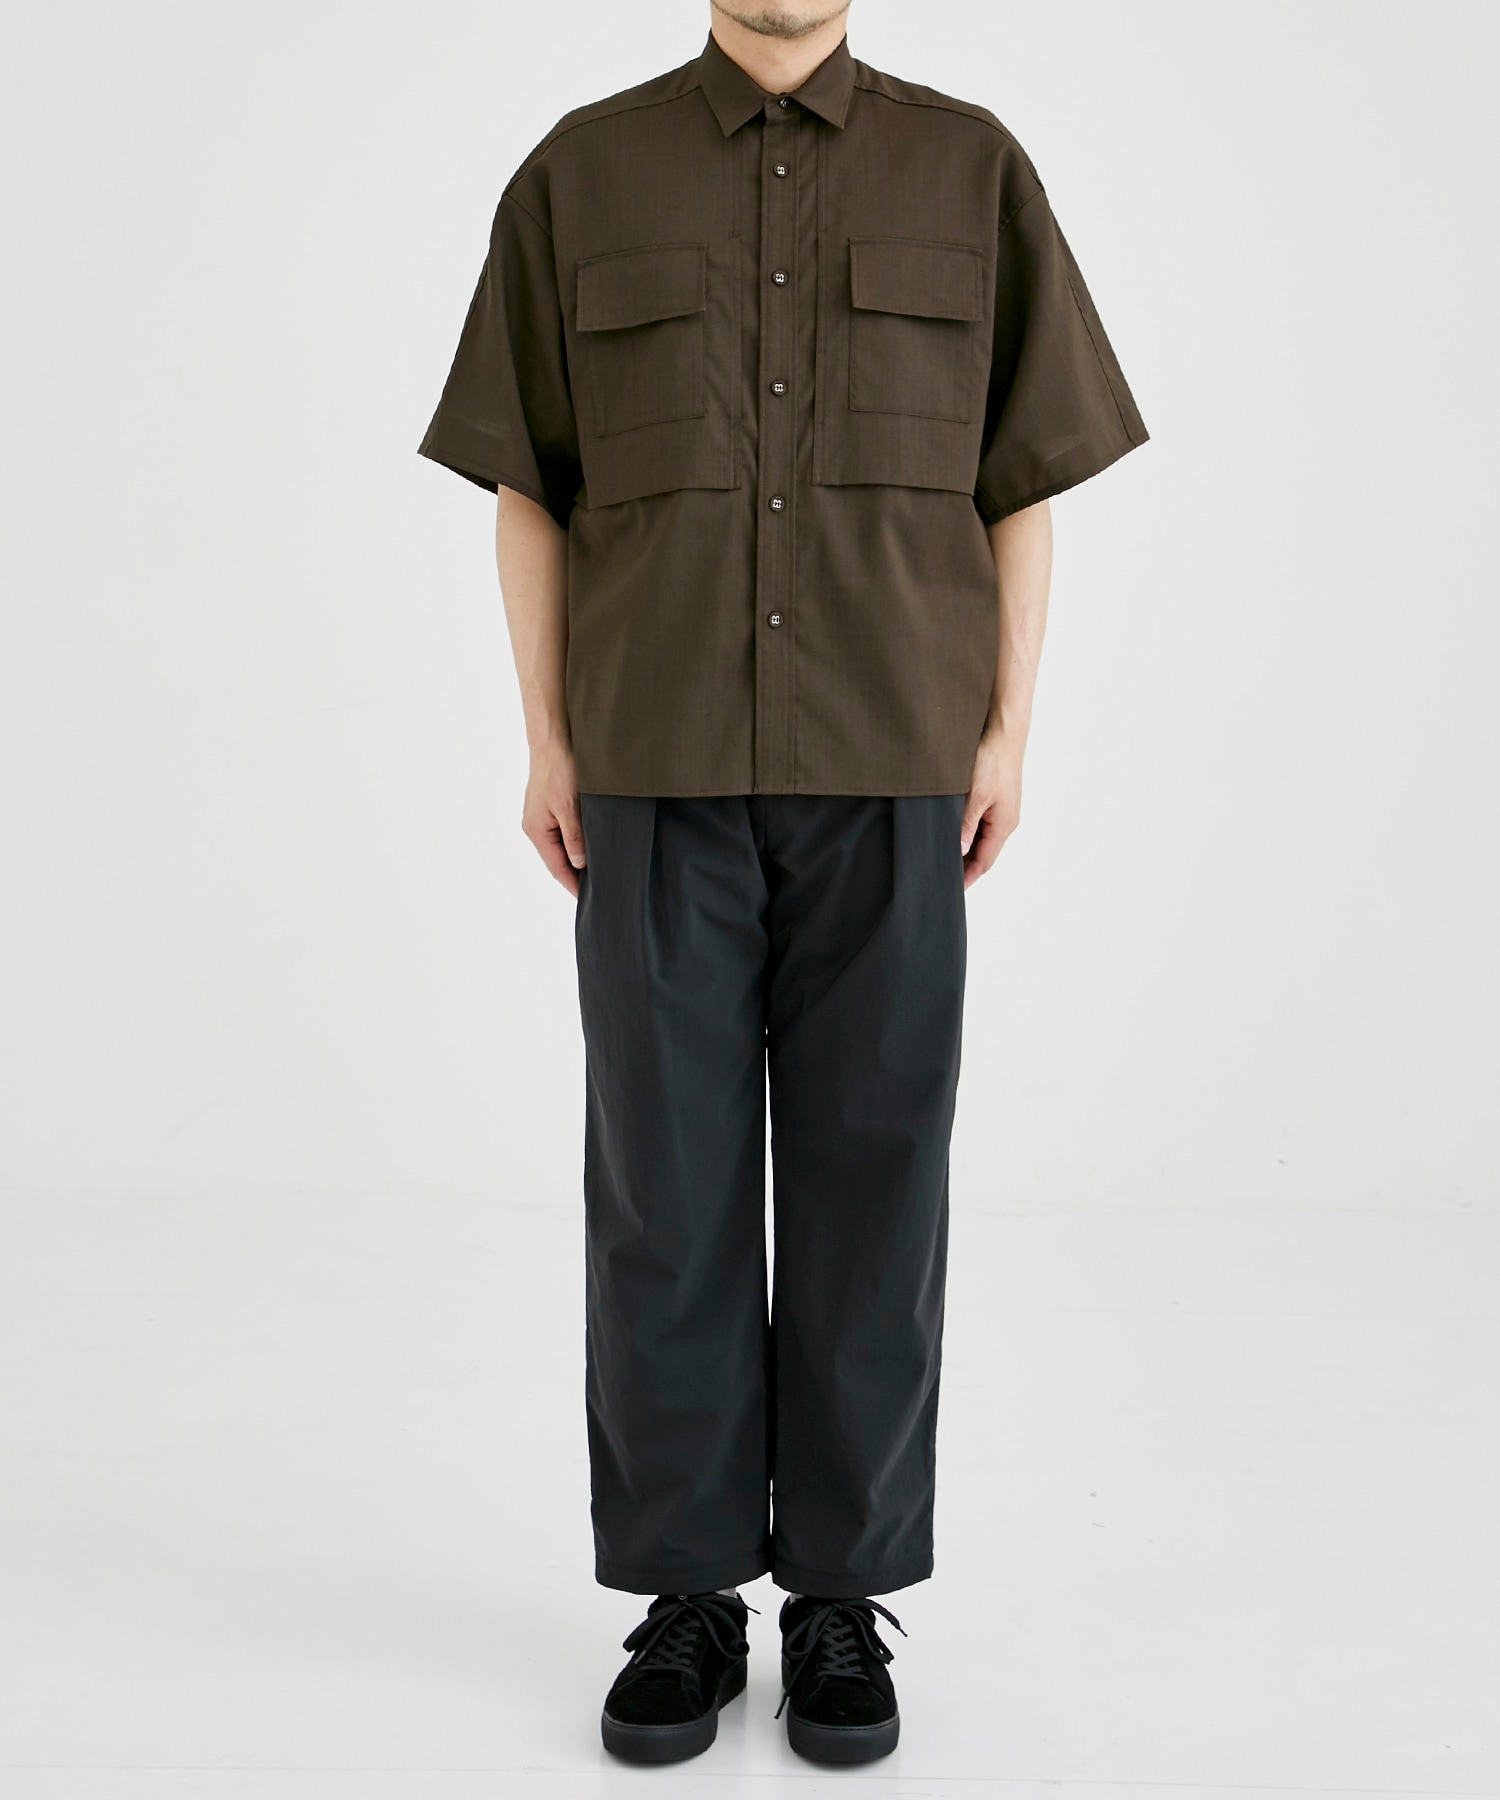 SOLOTEX WIDE S/S SHIRT White Mountaineering